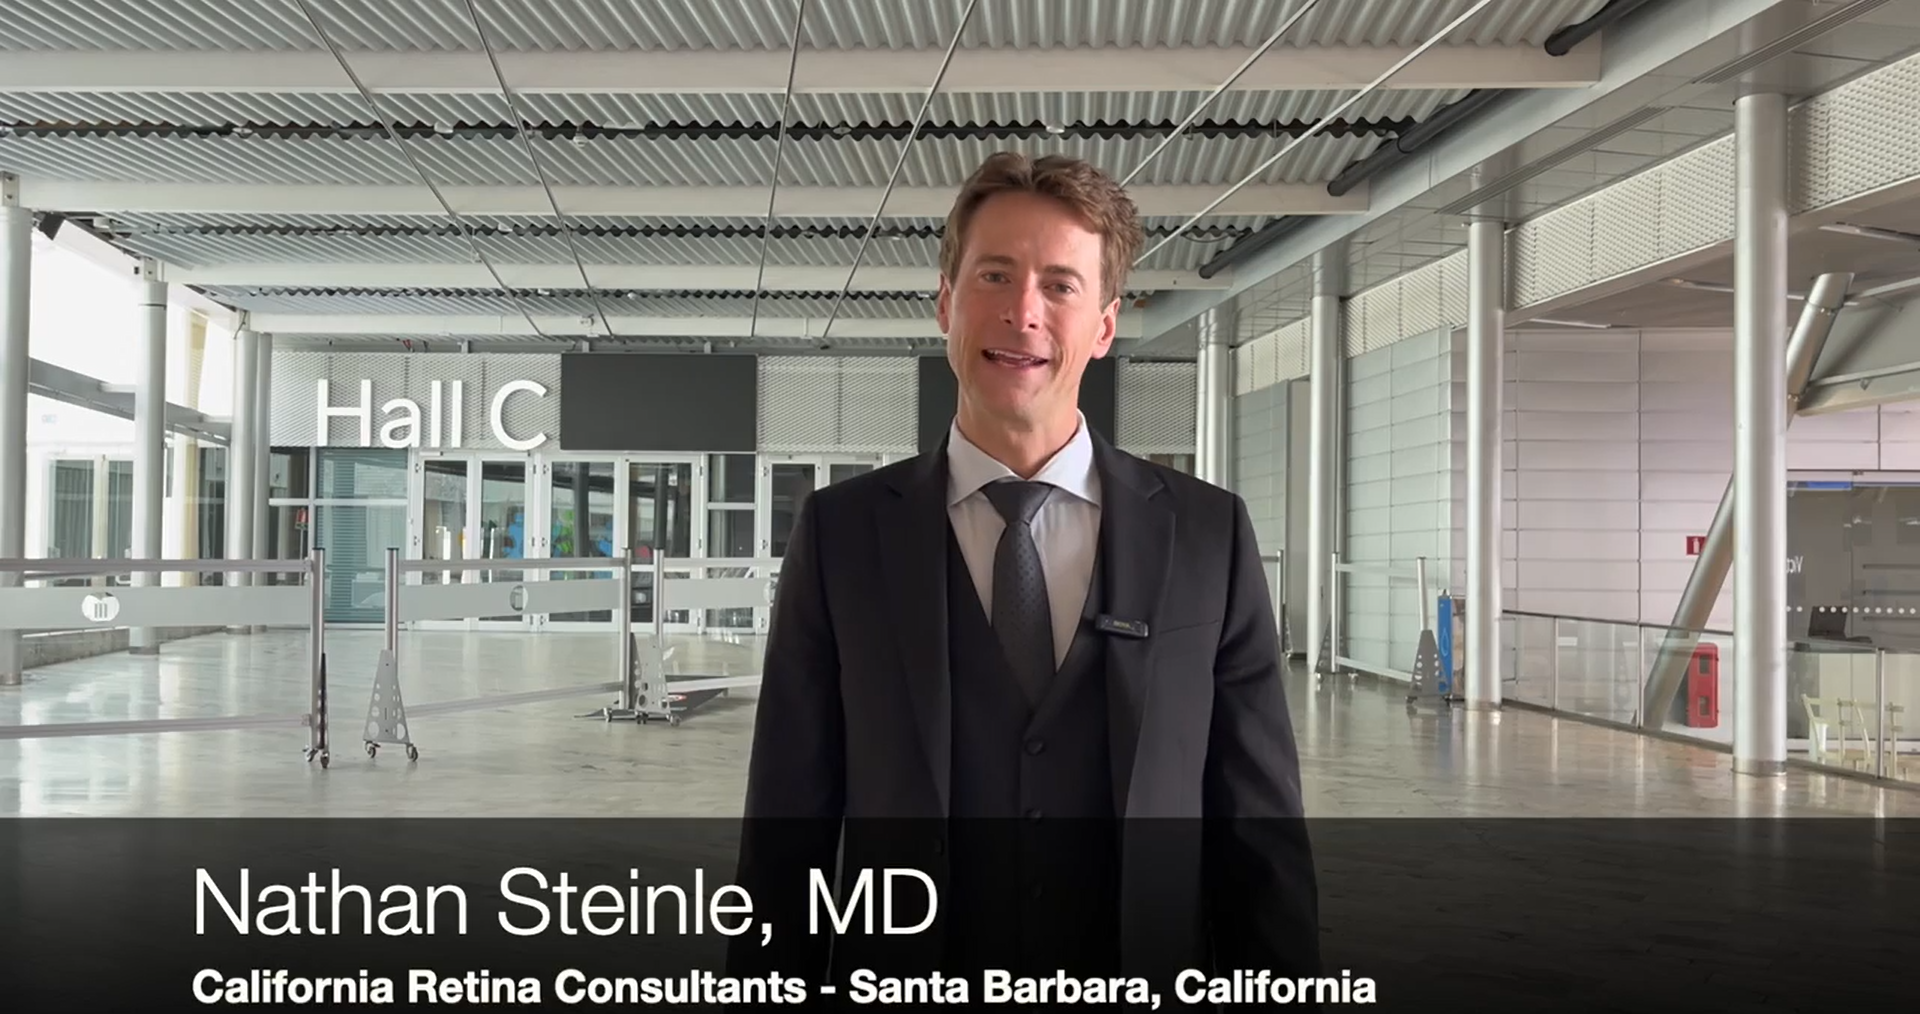 Nathan Steinle, MD, spoke with Modern Retina about the ongoing research on the durability of sozinibercept in combination therapy with anti-VEGF-A treatments at the annual ASRS meeting in Stockholm, Sweden.